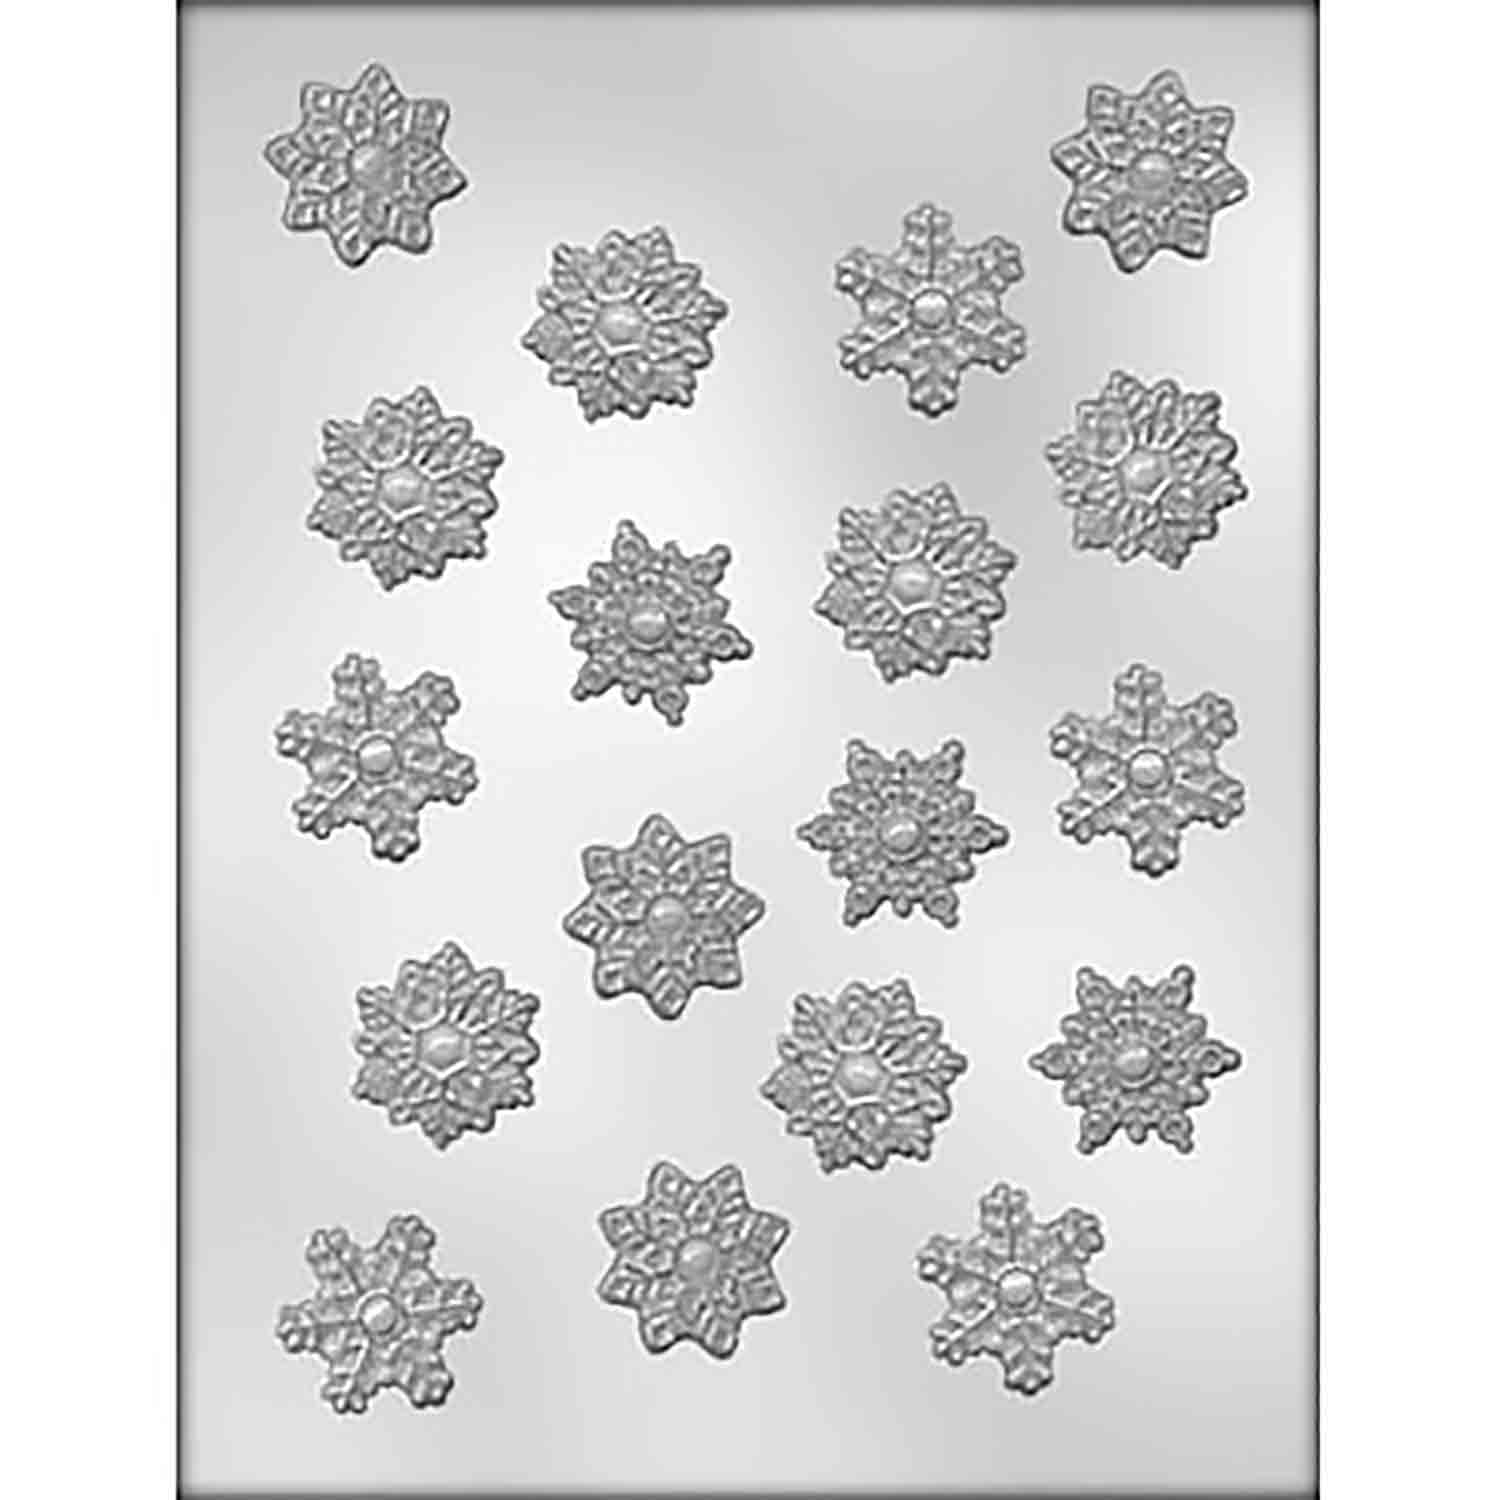 Snowflake #2 Chocolate Candy Mold